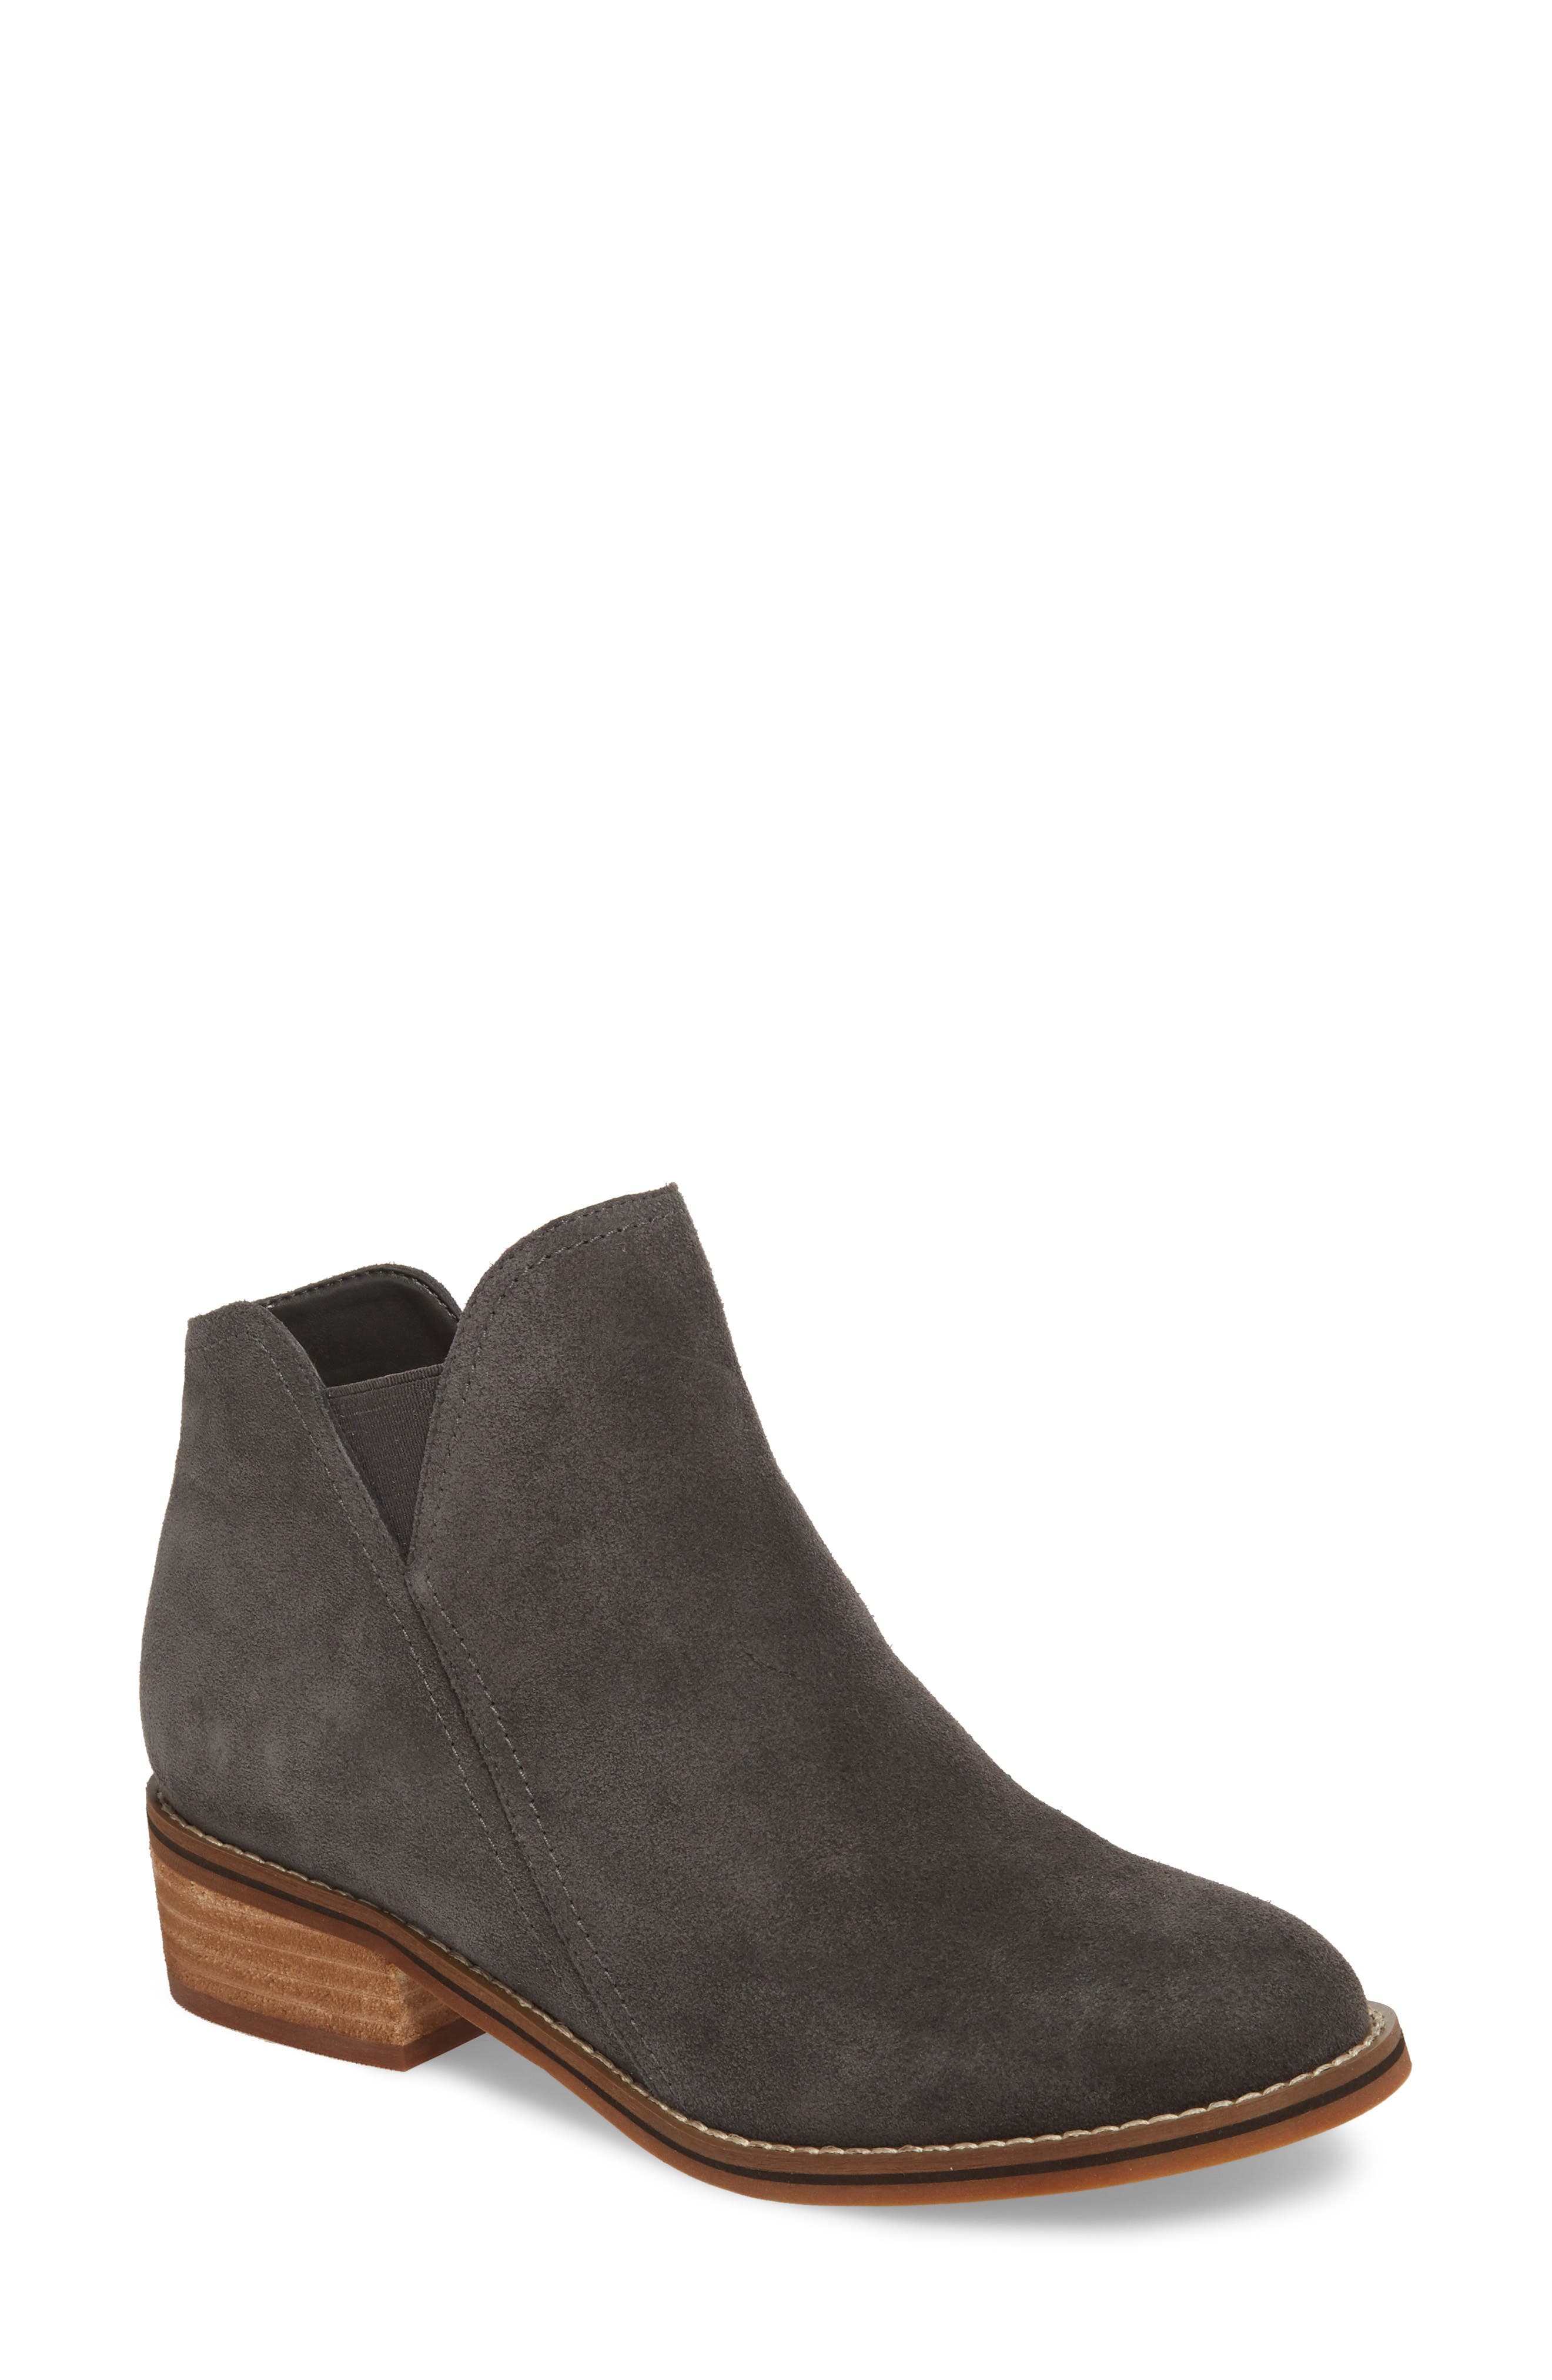 blondo ankle boots on sale